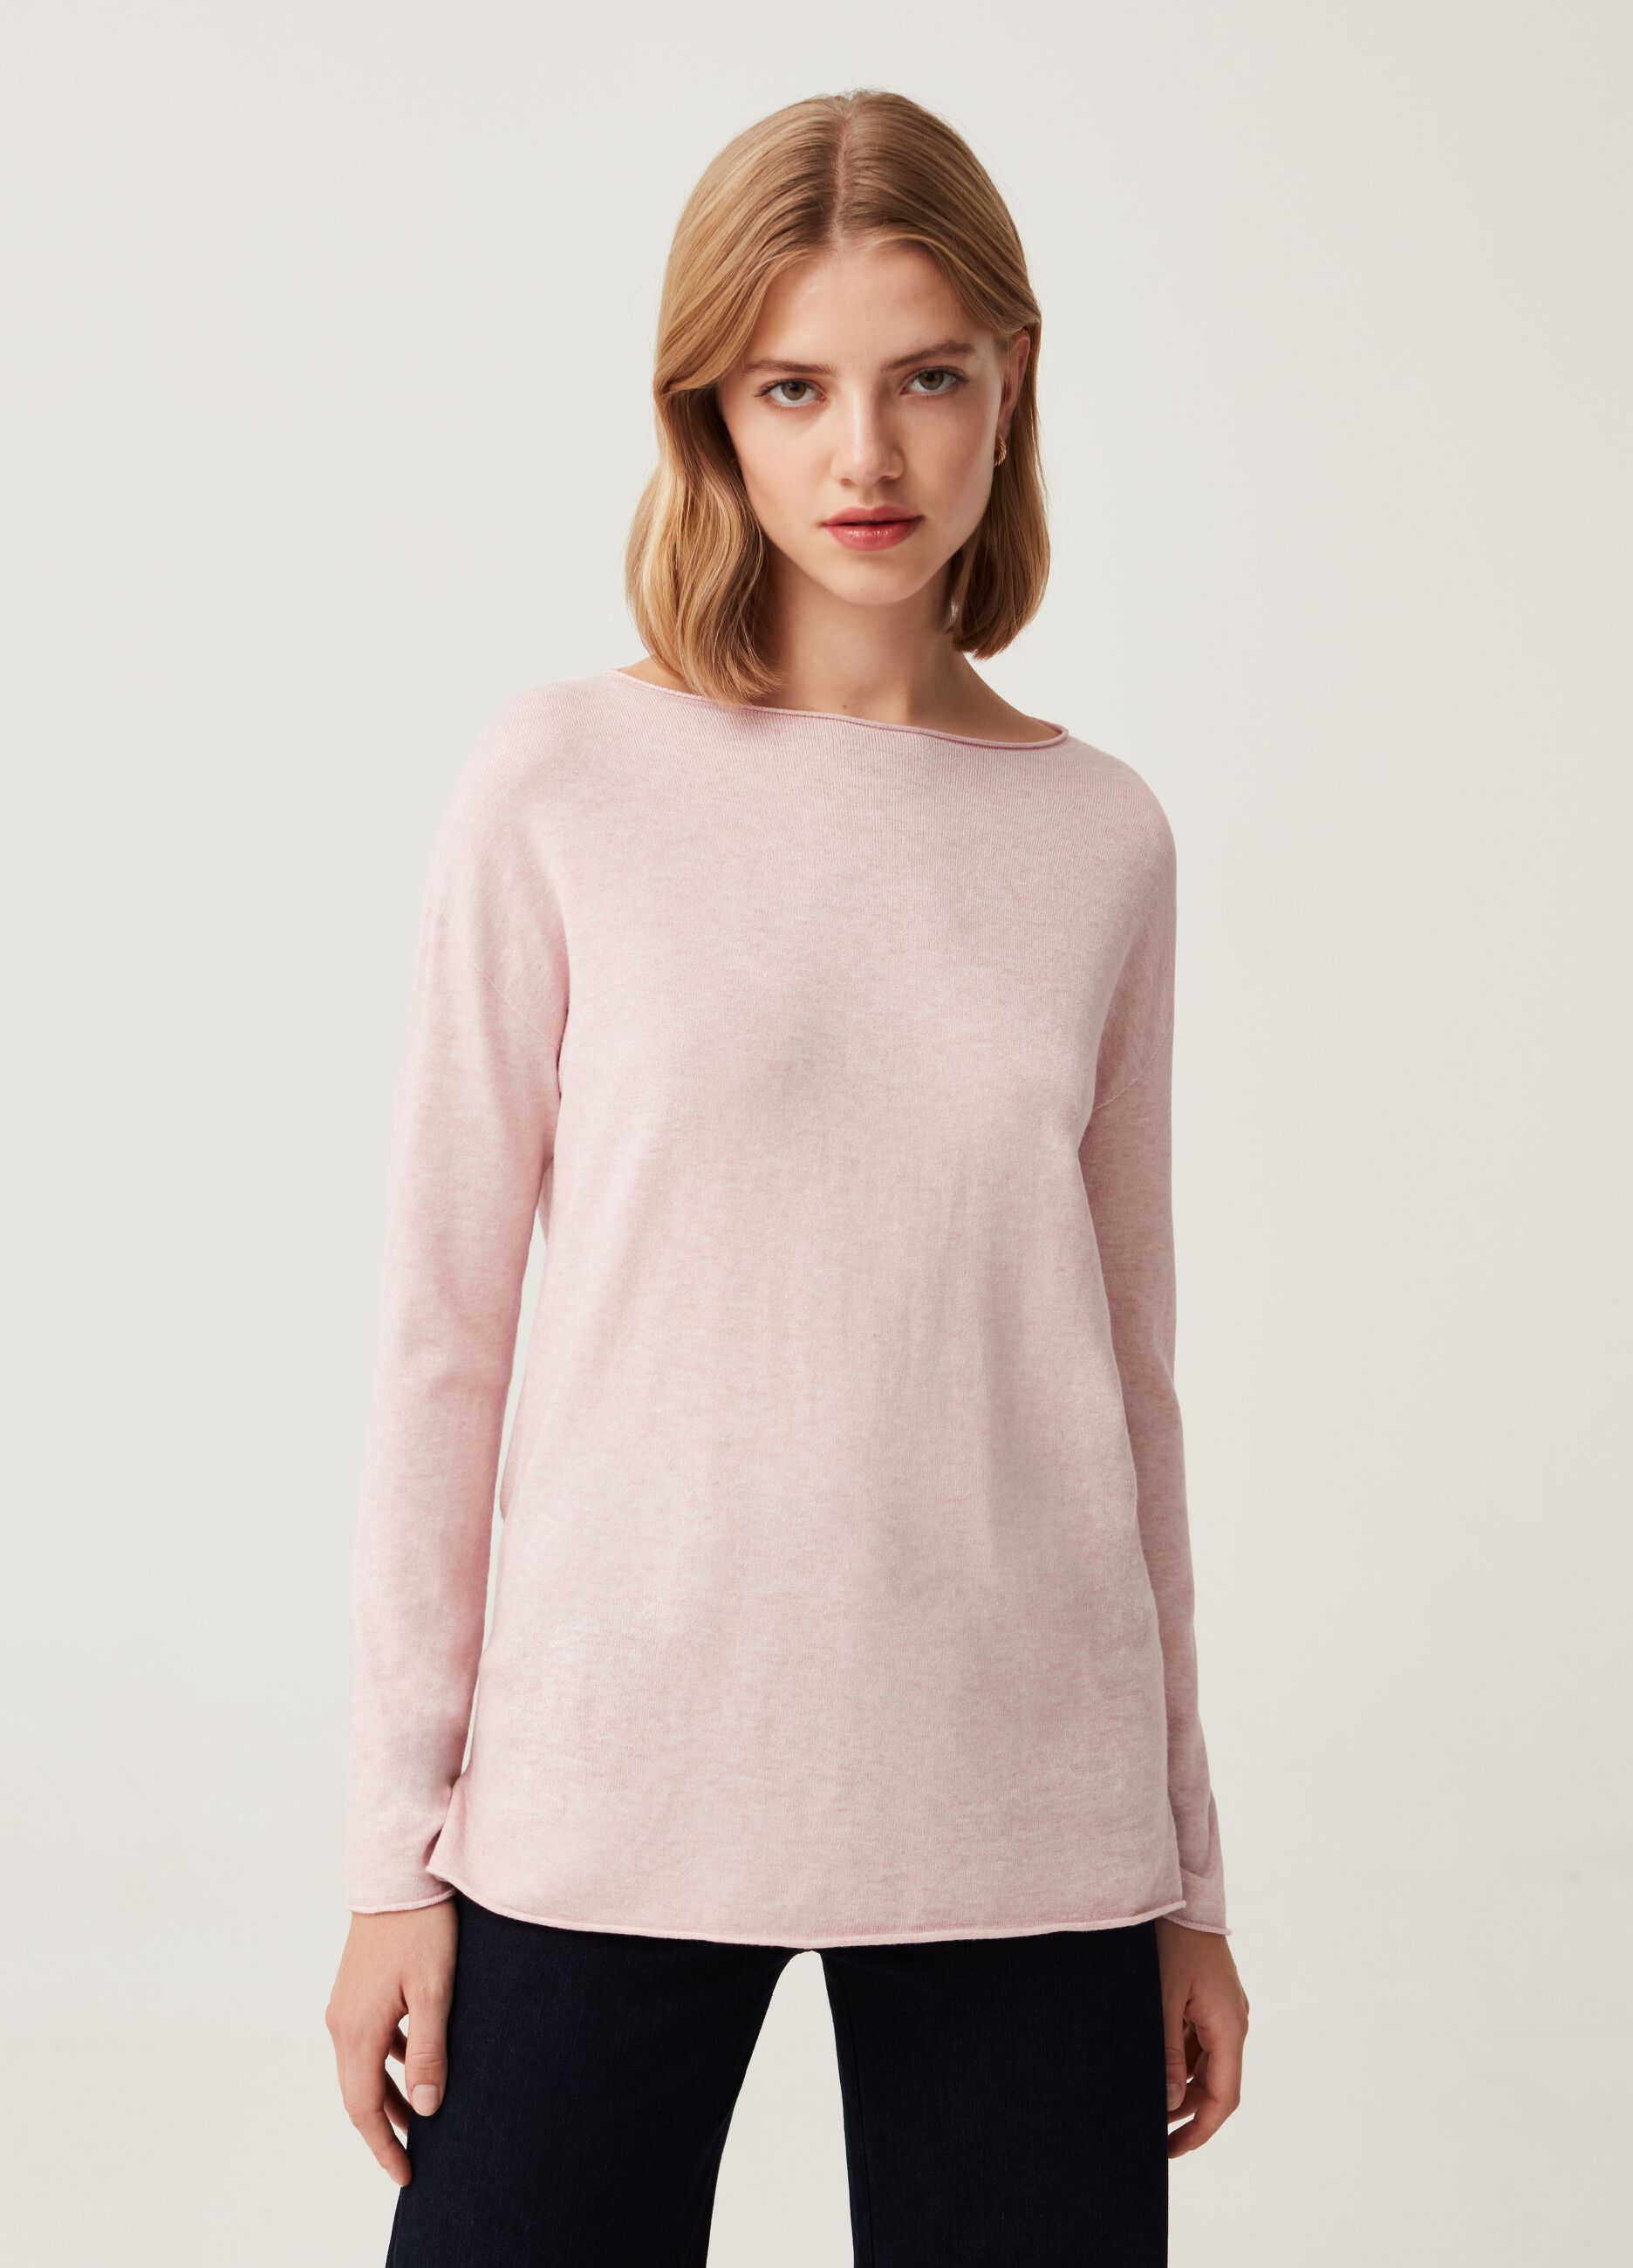 Hybrid top with long sleeves